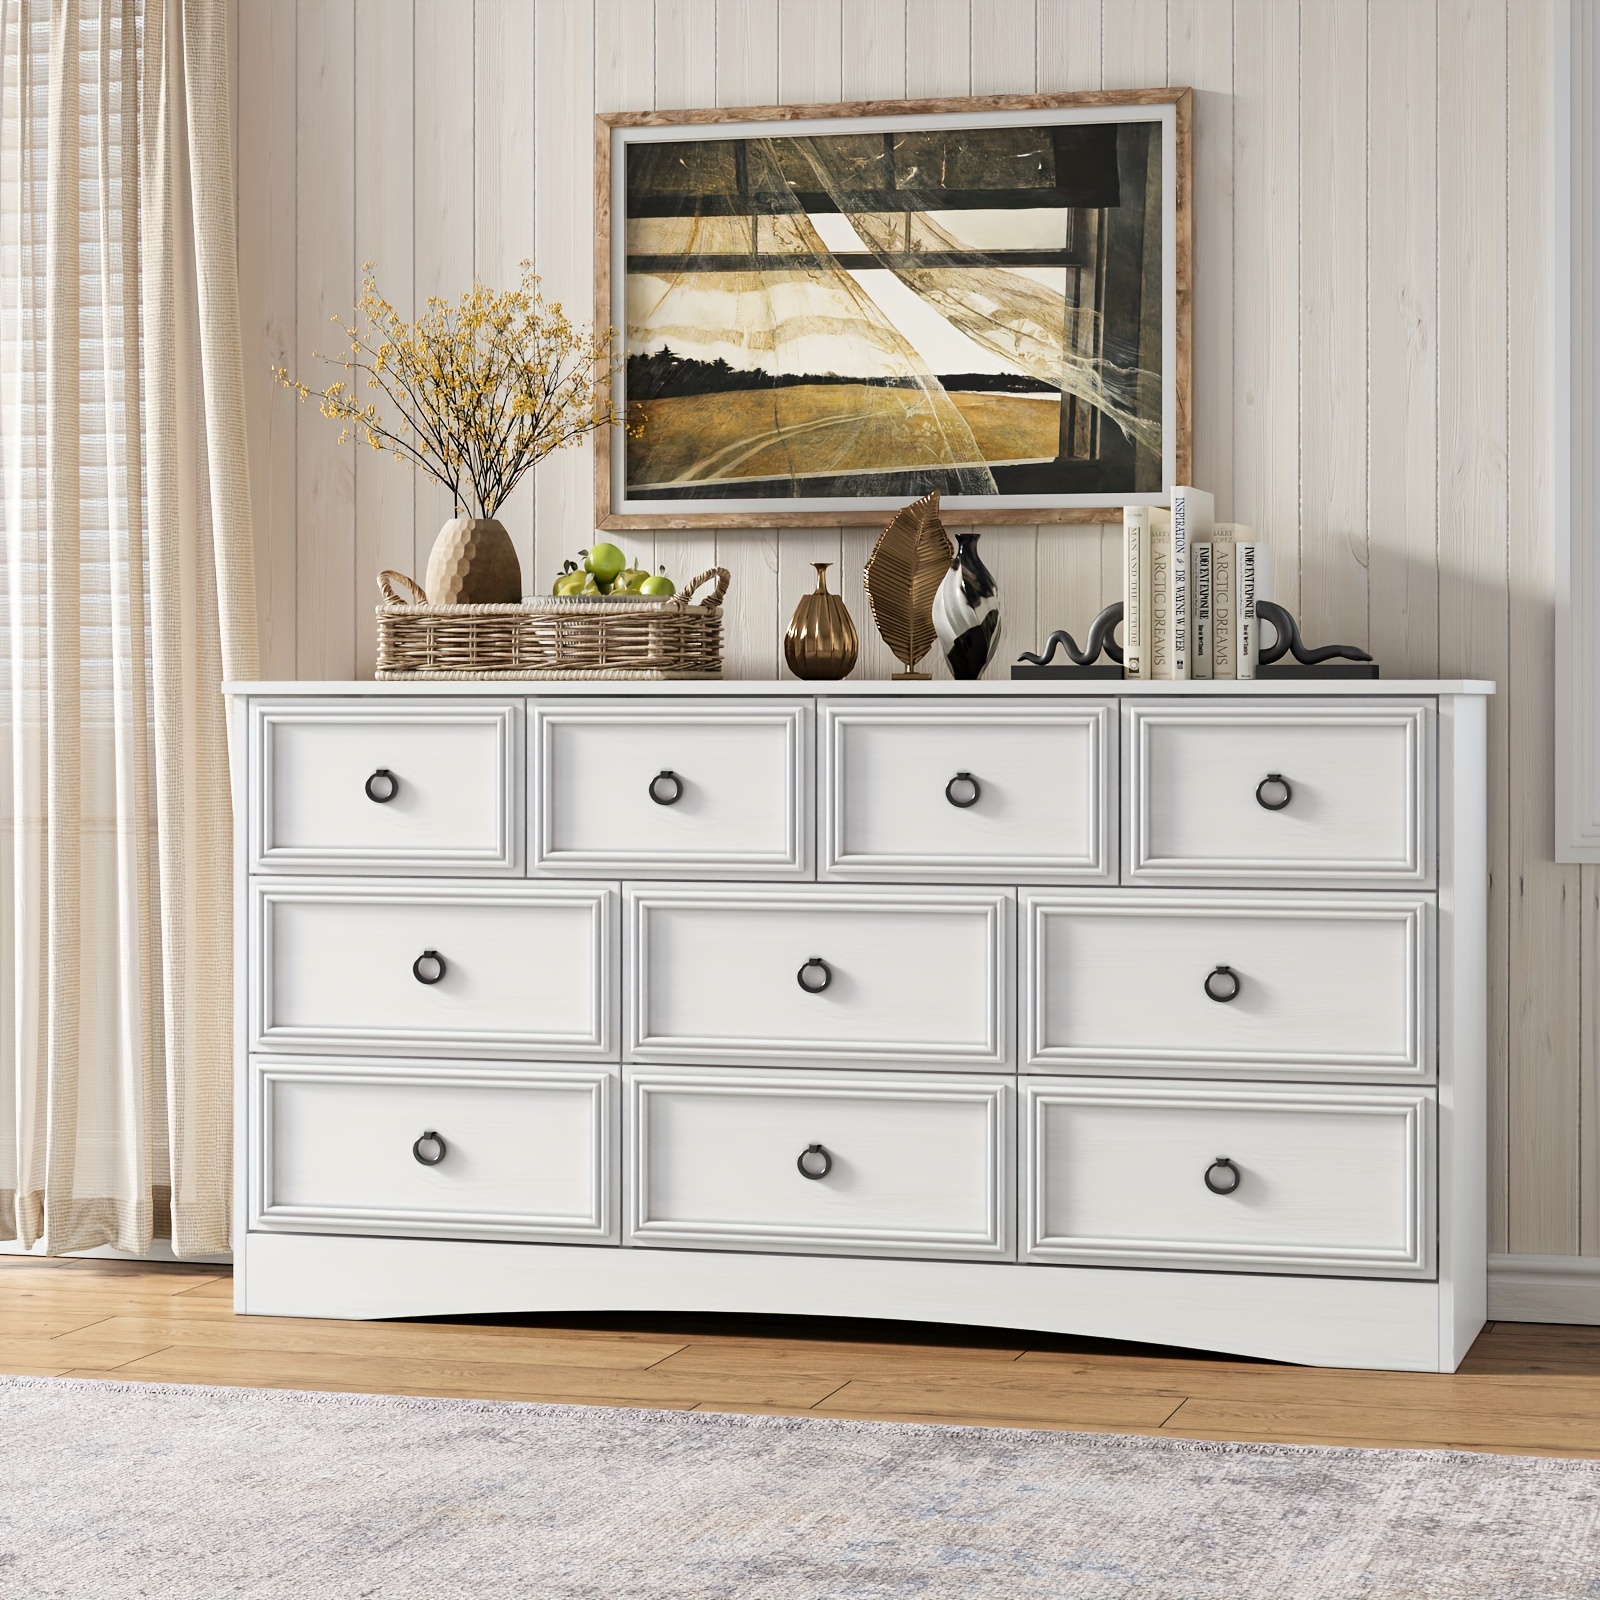 

Dresser For Bedroom With 10 Drawers, Modern Wide Chest Of Drawers For Living Room, Hallway, Storage Organizer Unit With Metal Slides & Drawer Strong Bottom Support, 59"l X 15.8"w X 32.3"h